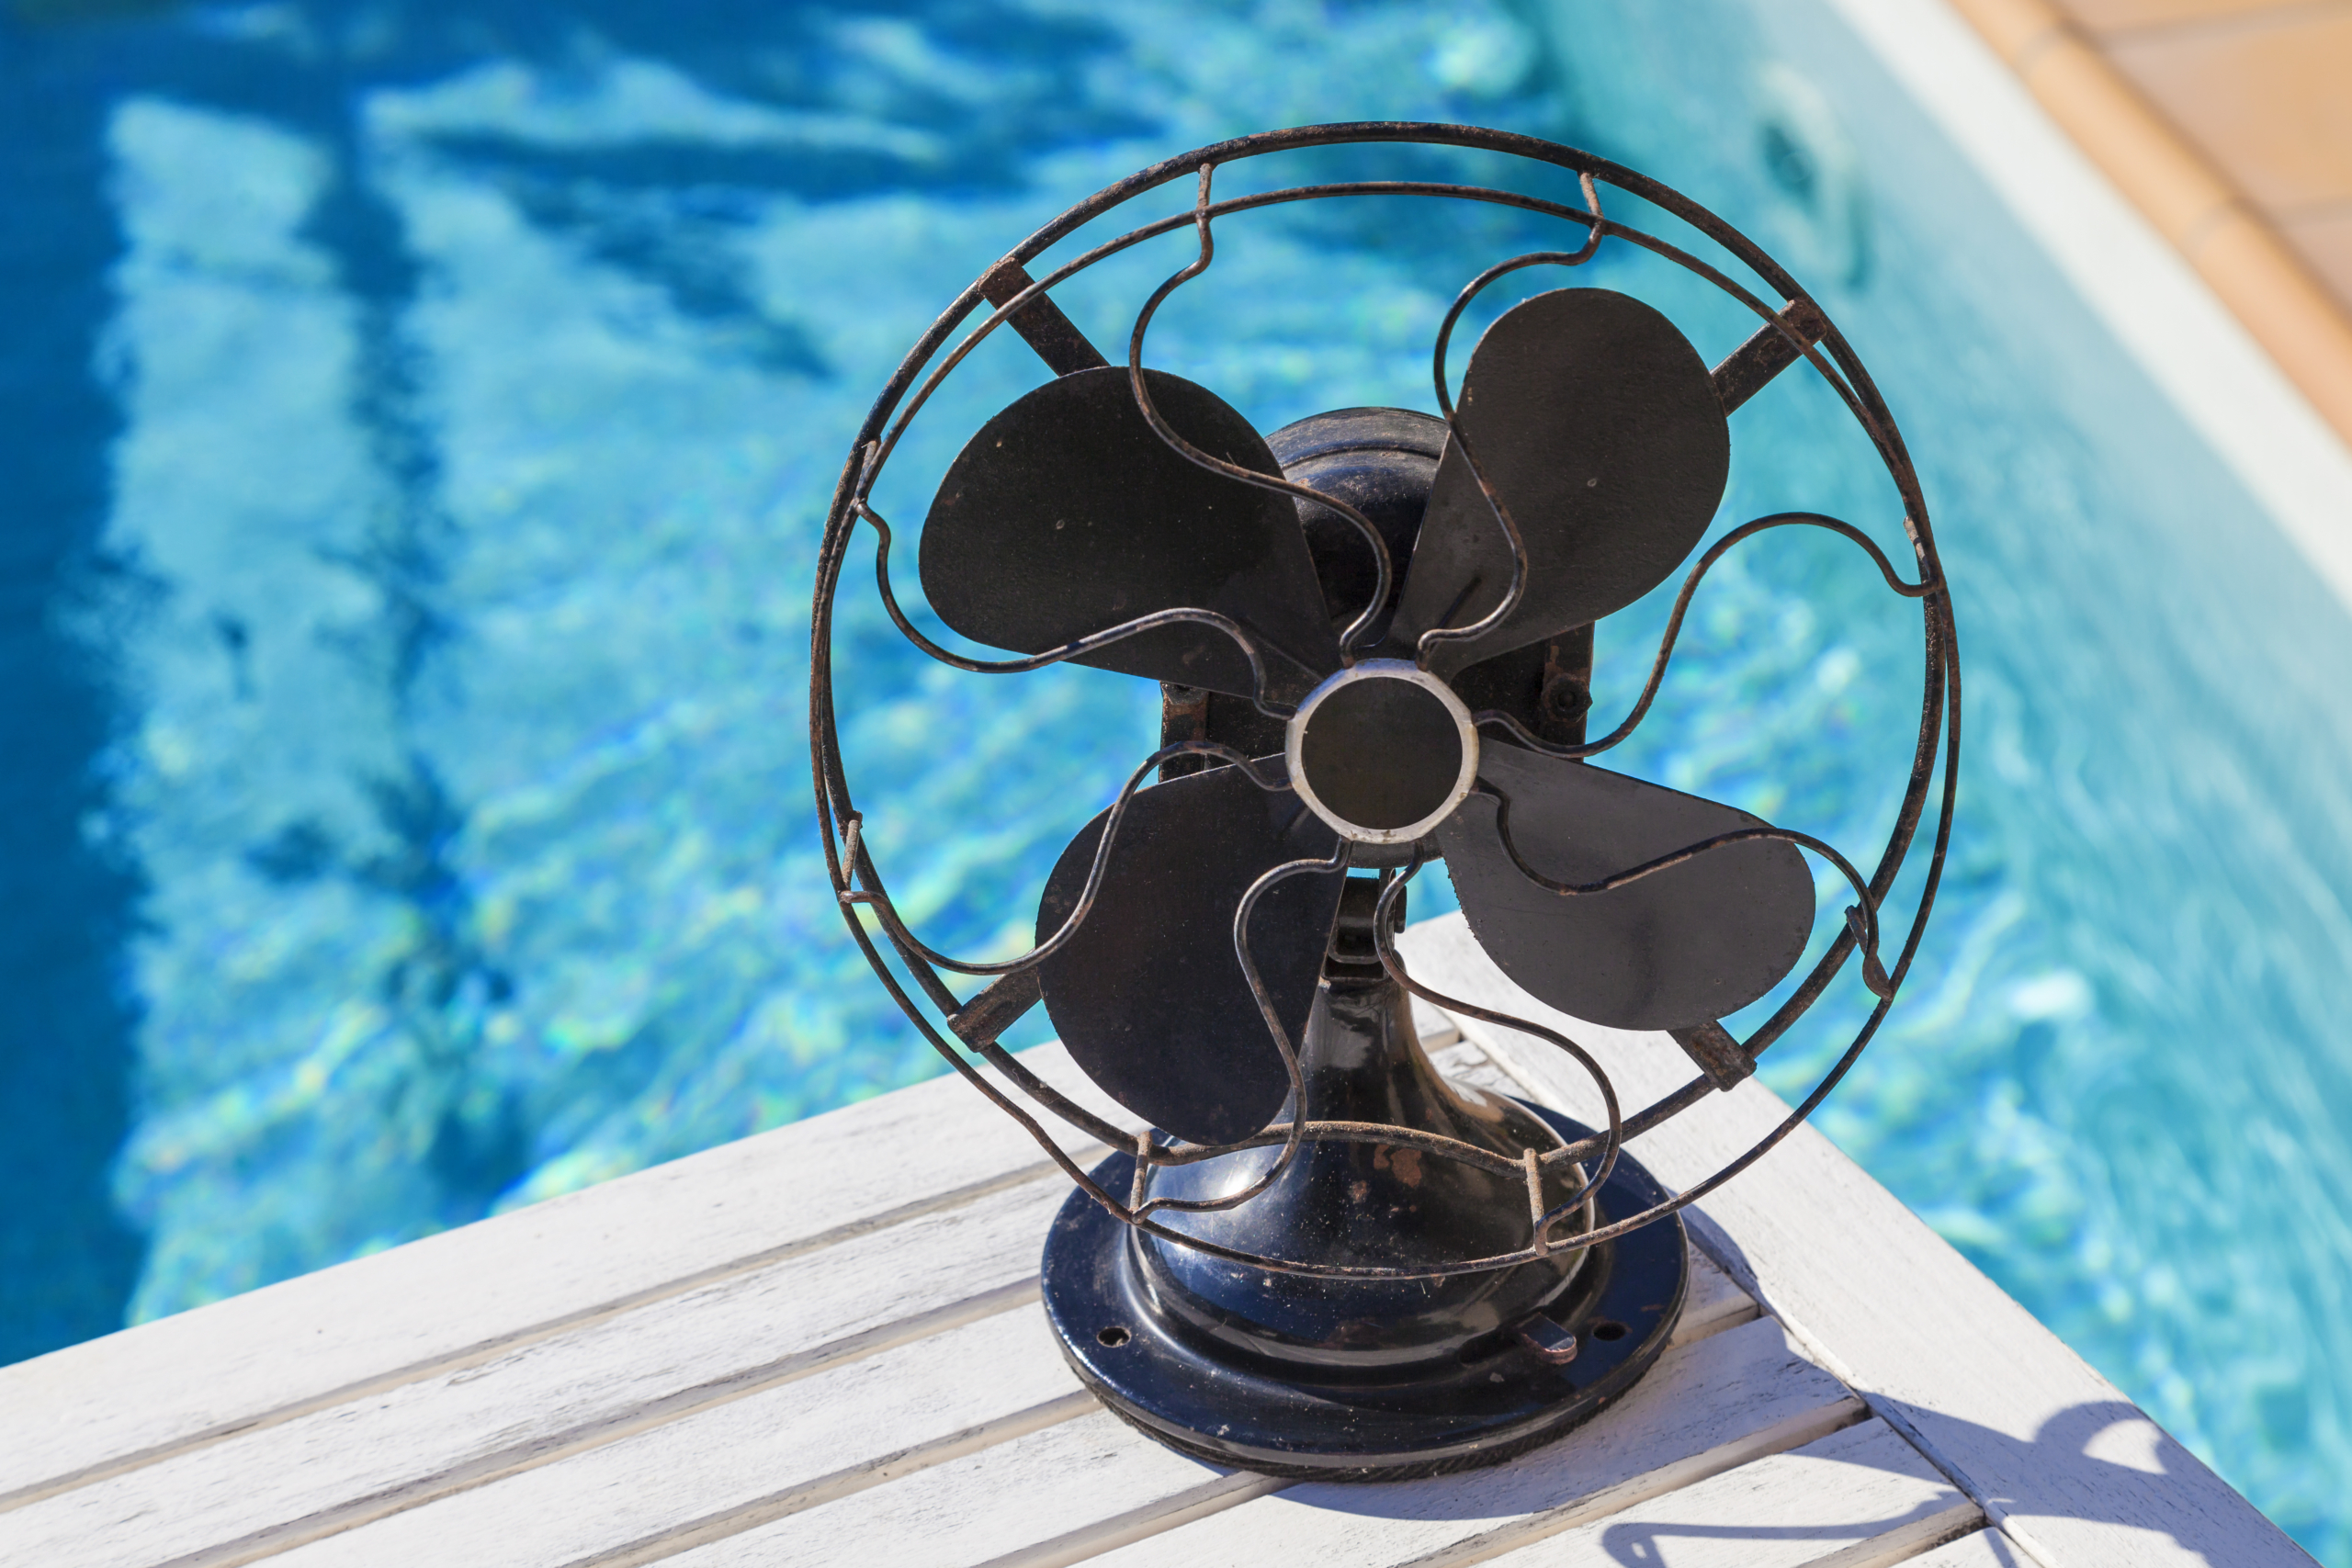 A fan staying cool on the side of a pool